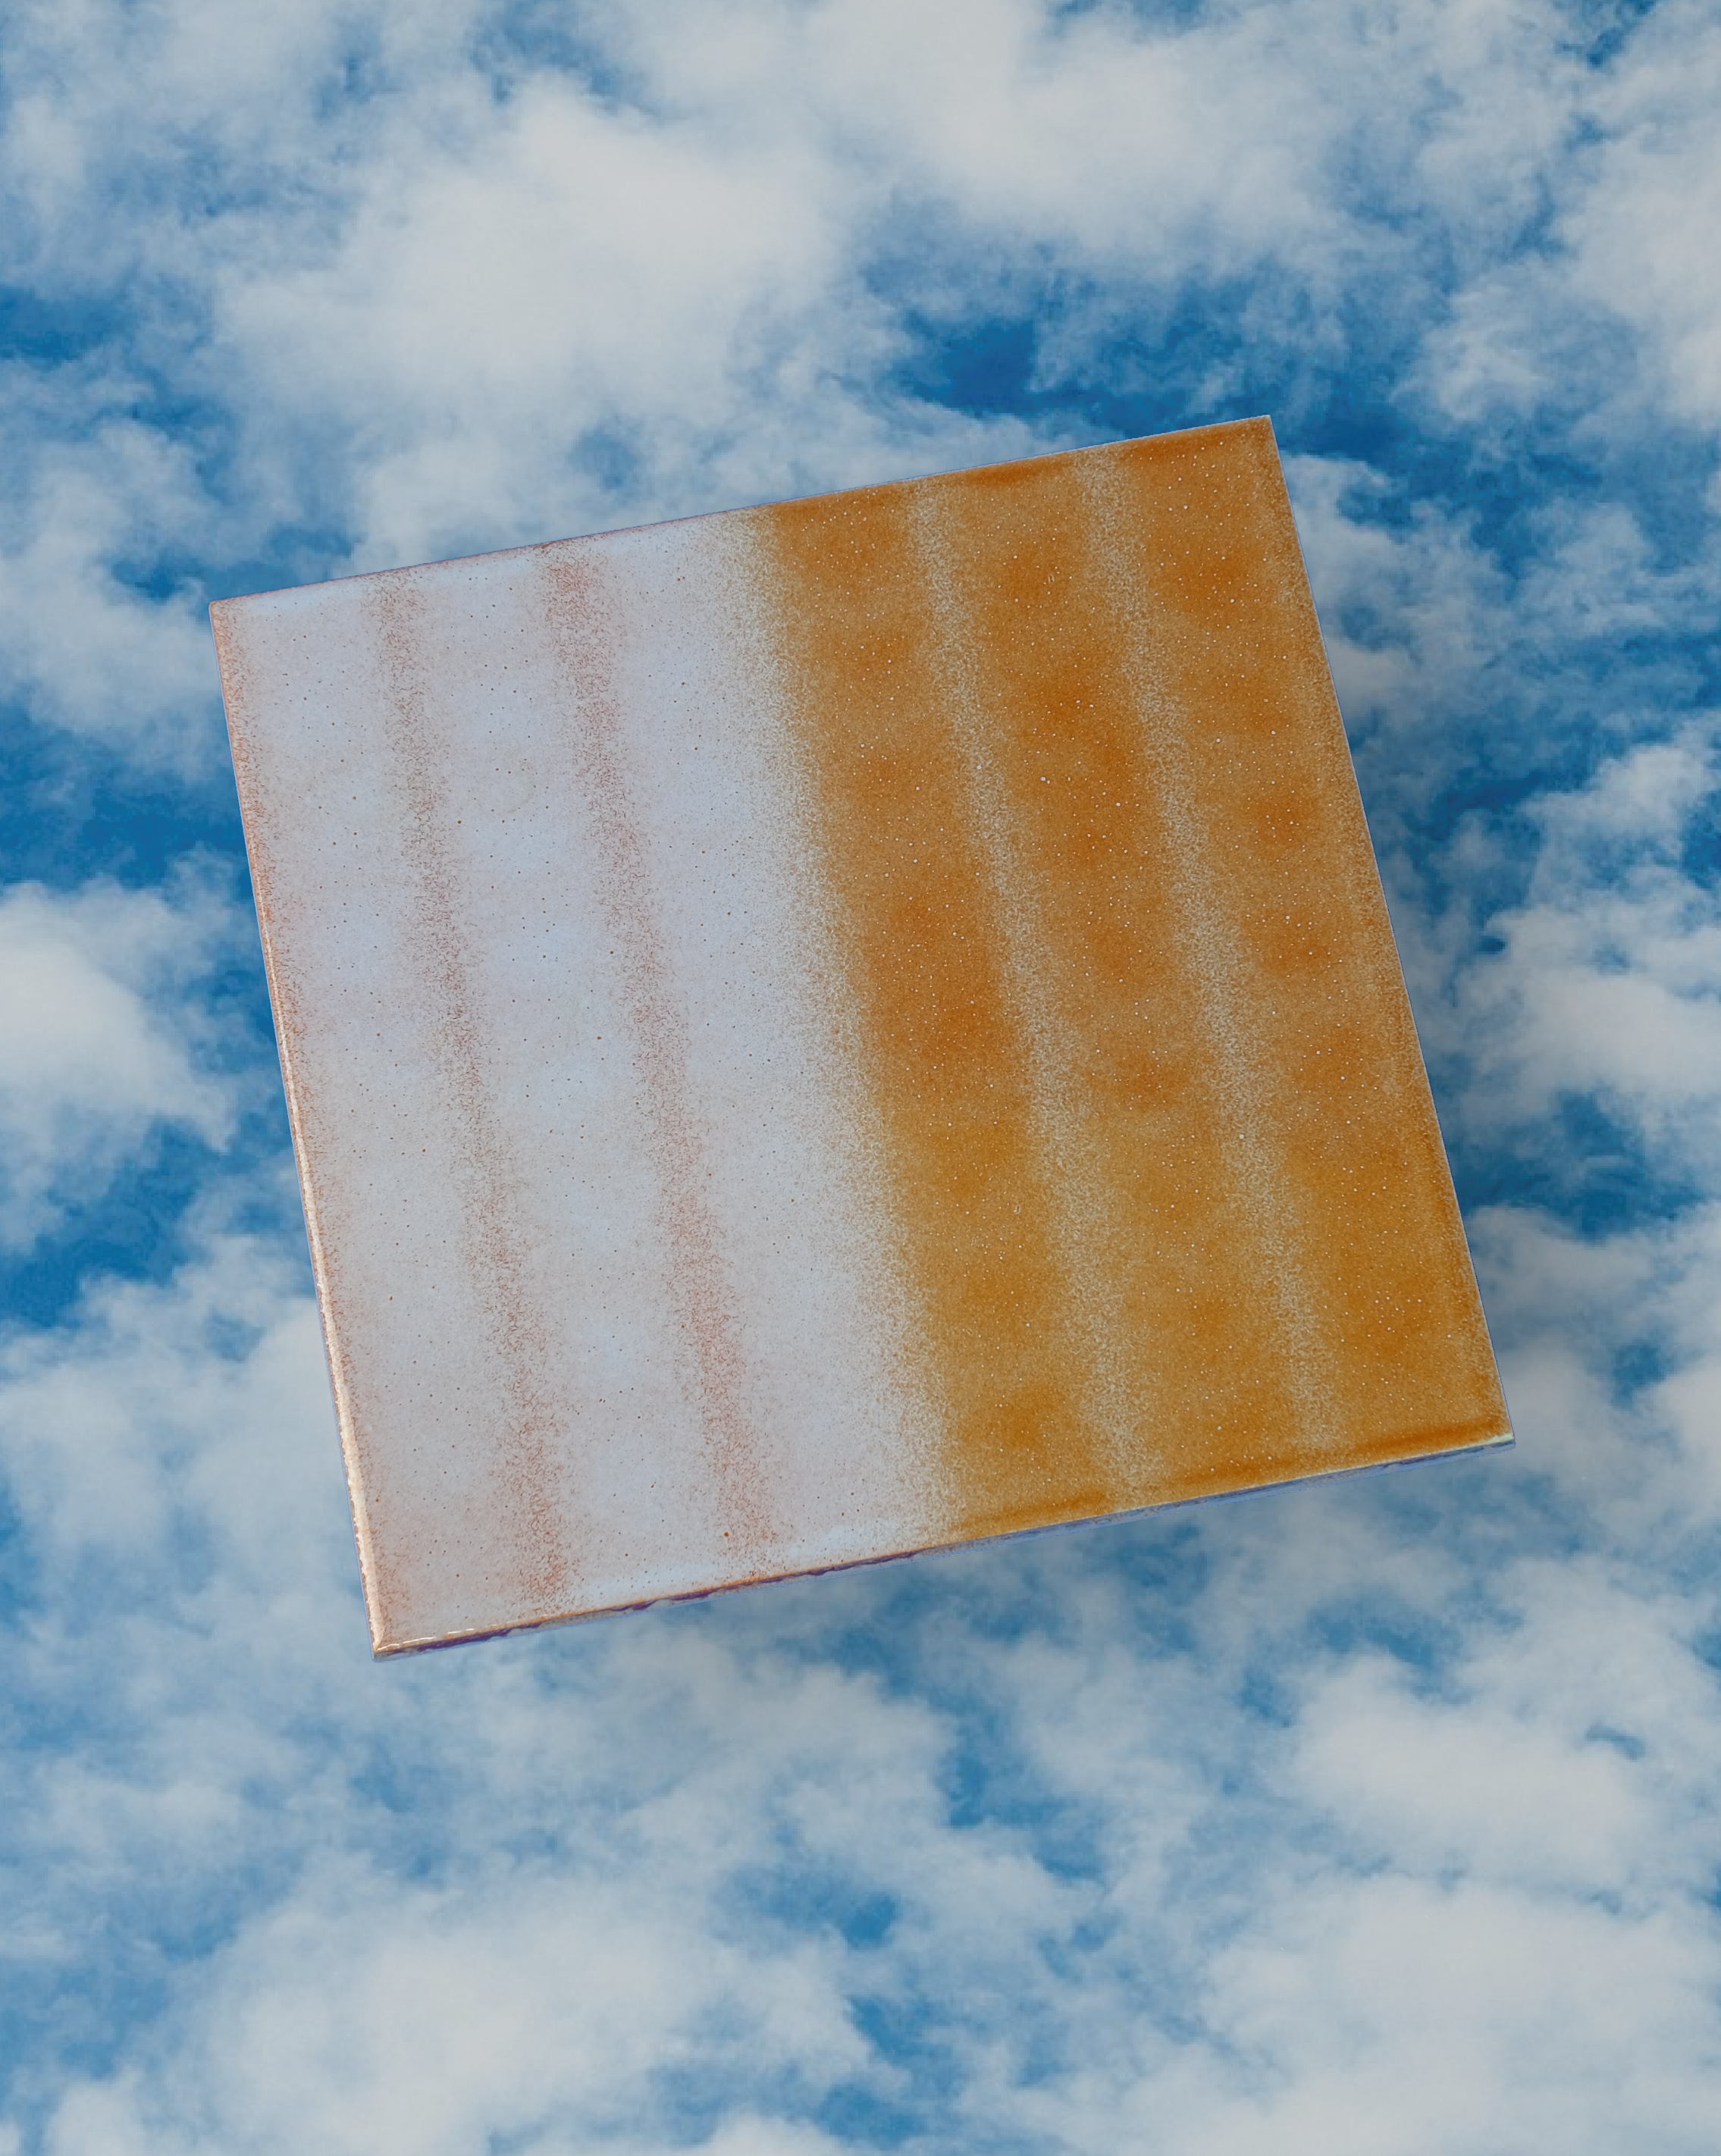 A single ceramic tile, it's glaze half pale white with thin yellow striping and the other half yellow with thin white striping is positioned against a photo background consisting of cloudy blue skies